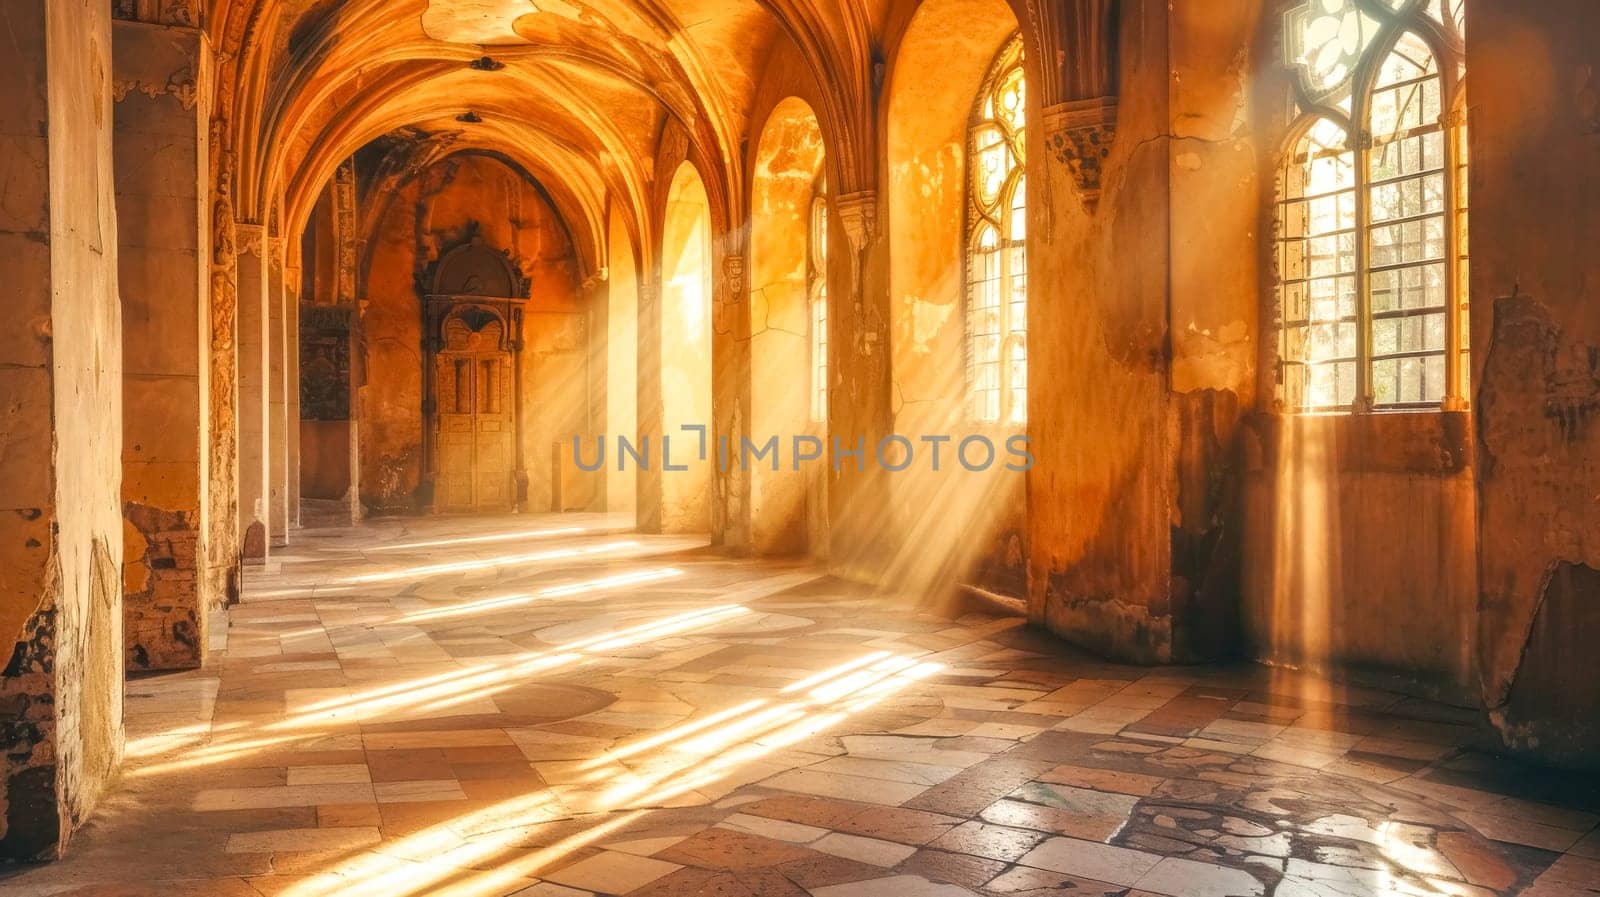 Golden sunlight streams through arched windows in an ancient, empty church interior